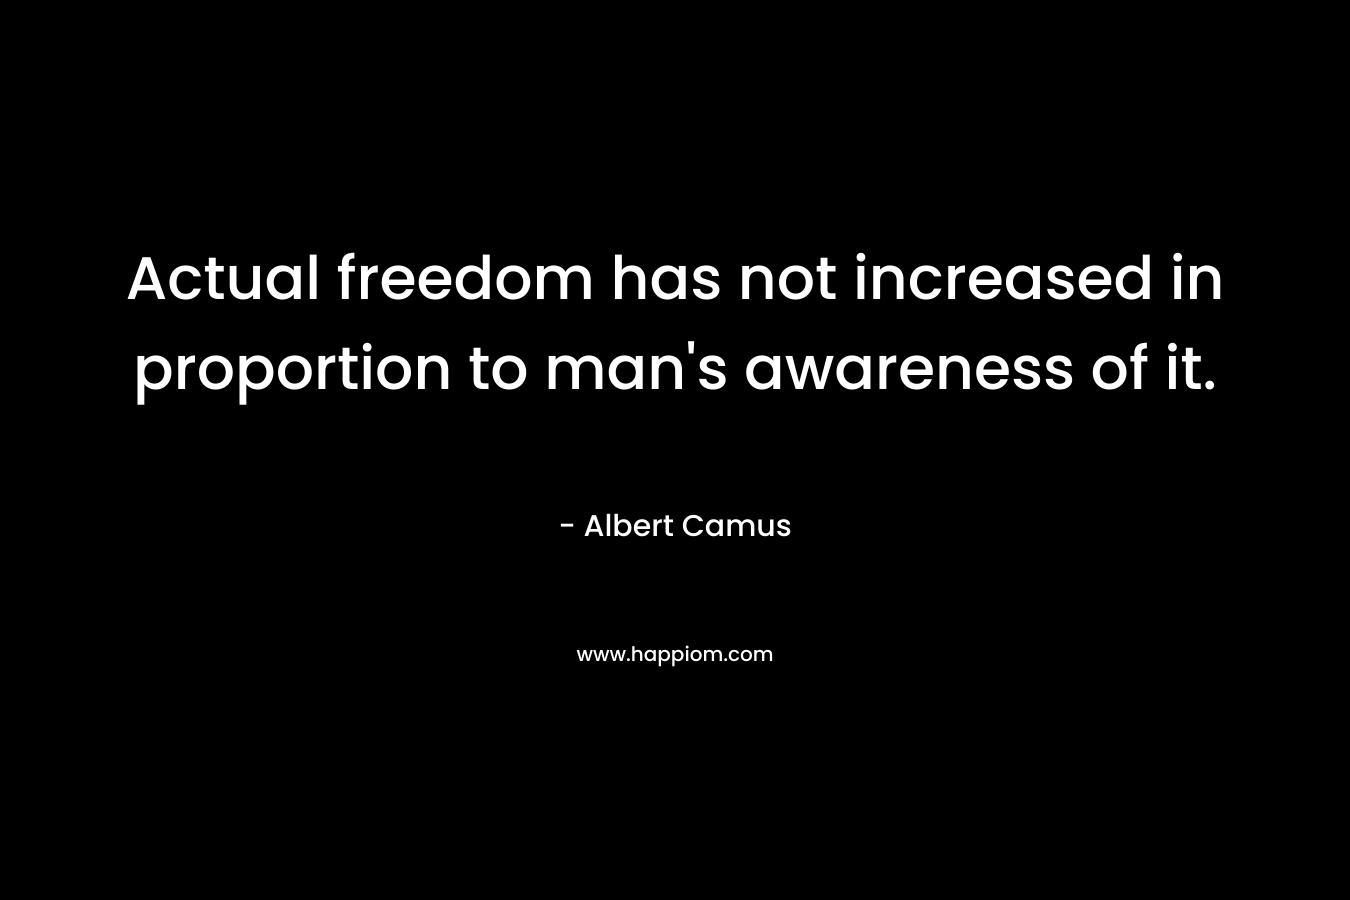 Actual freedom has not increased in proportion to man’s awareness of it. – Albert Camus